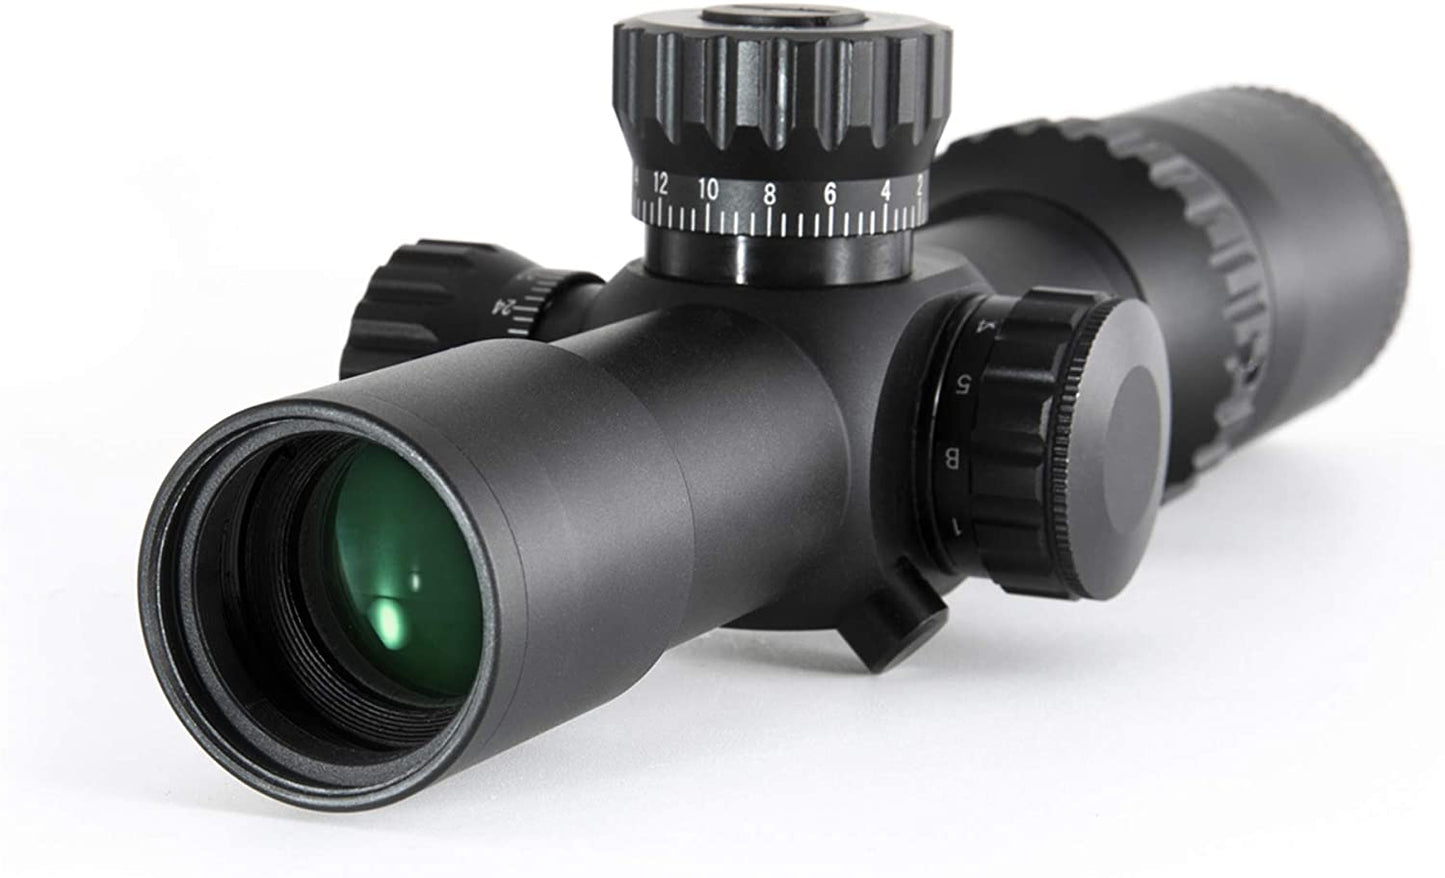 1-5x24 First Focal Plane FFP Scope with Red Green Illuminated MOA Reticle, Anti-Reflection Devices